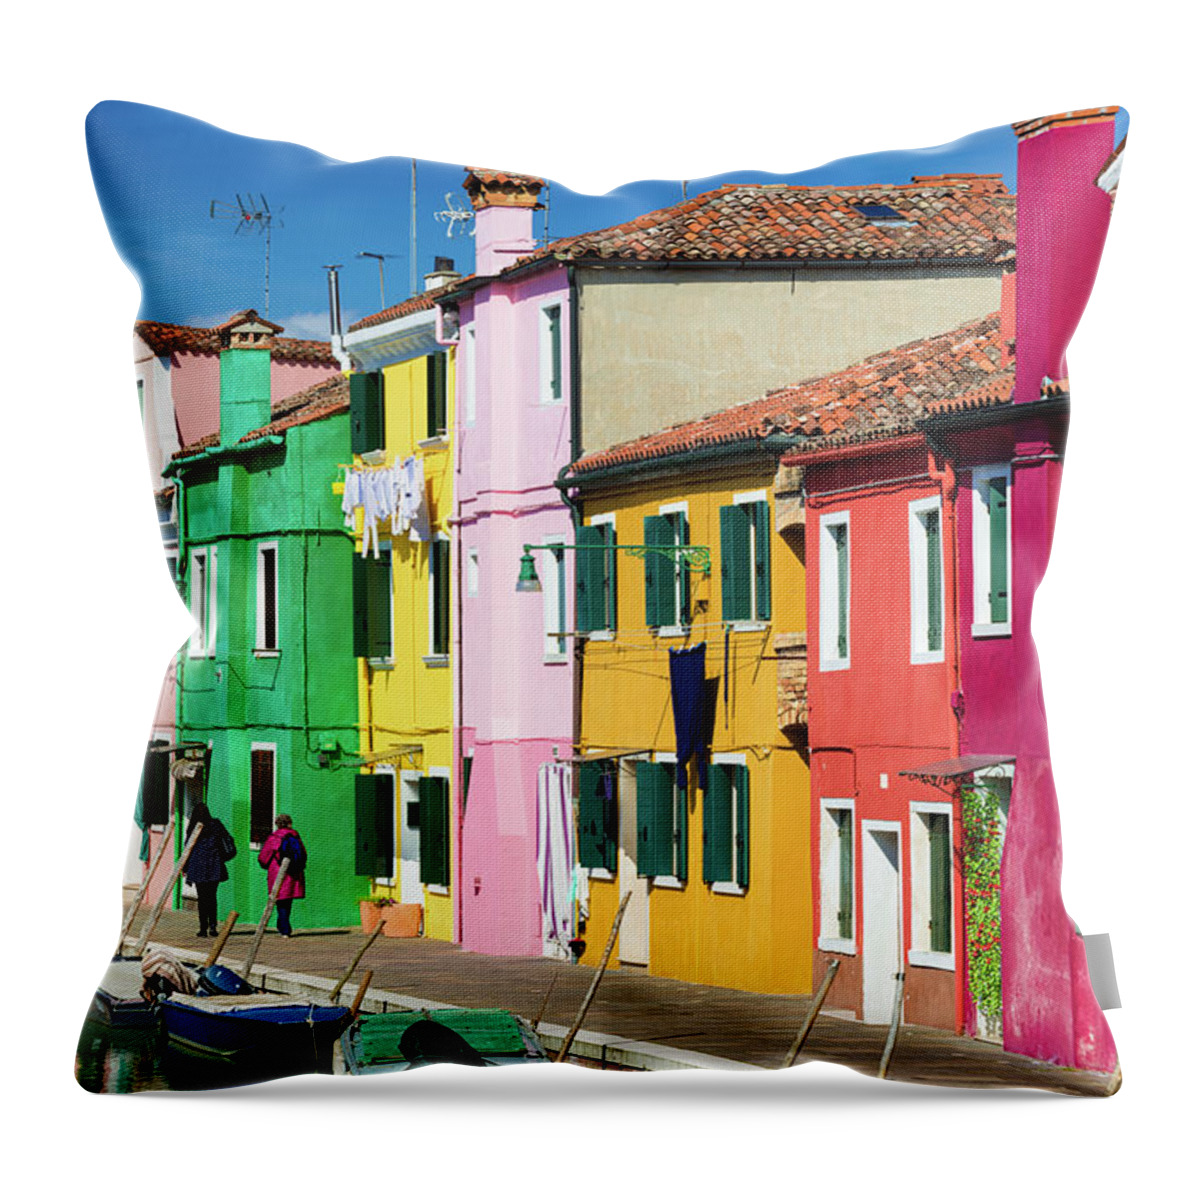 Burano Throw Pillow featuring the photograph Wonderful colored houses in Burano Venice Italy by Matthias Hauser